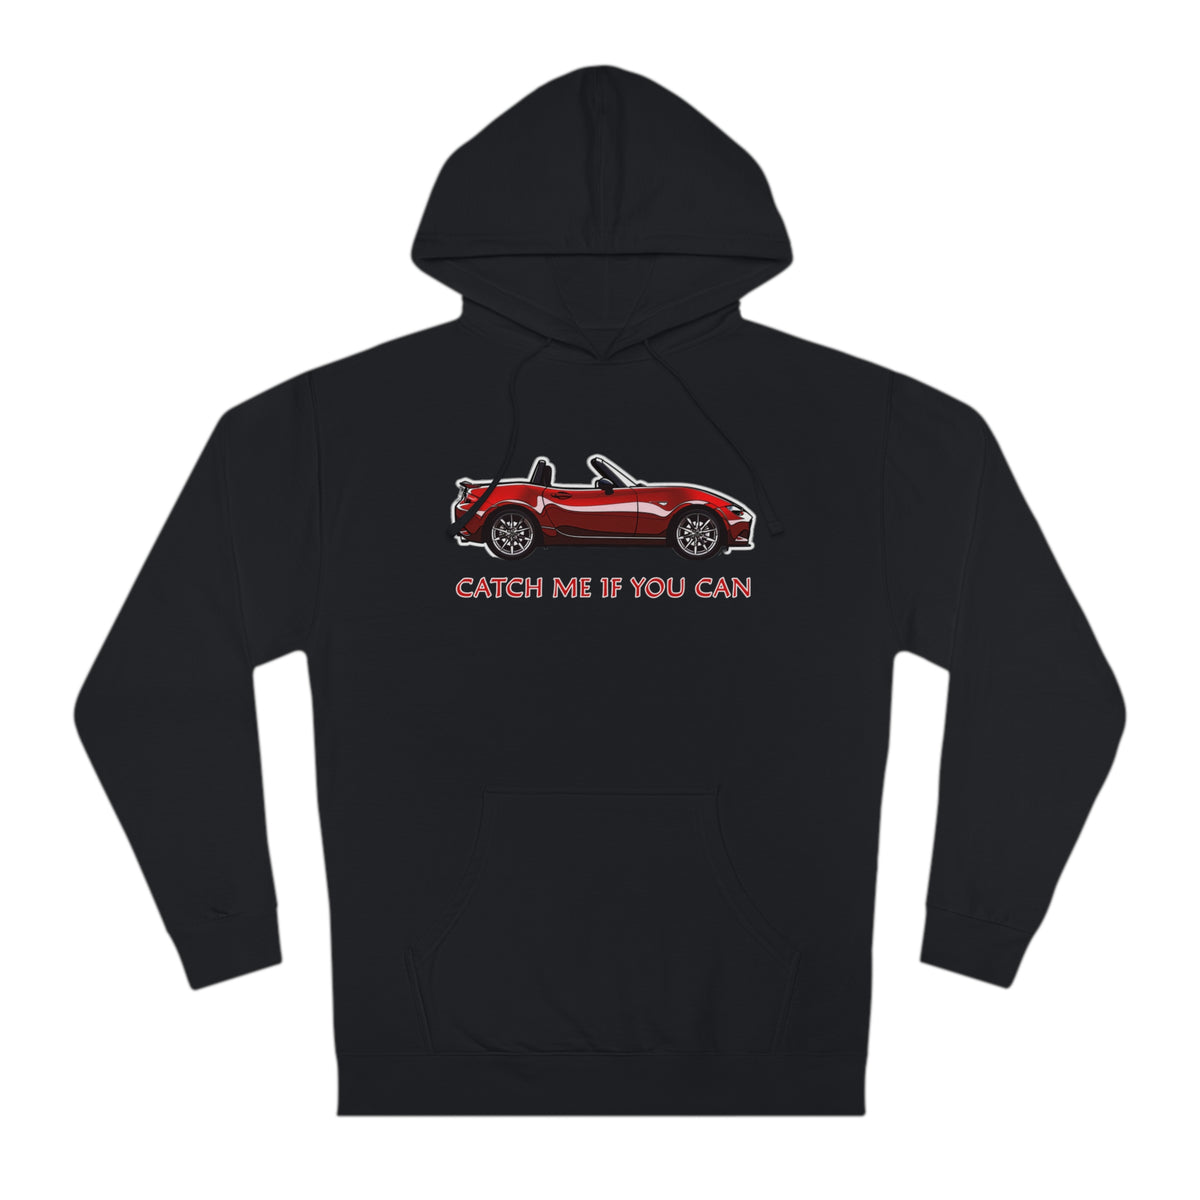 "Red Racer: Catch Me If You Can" JDM Hoodie/Hooded Sweatshirt